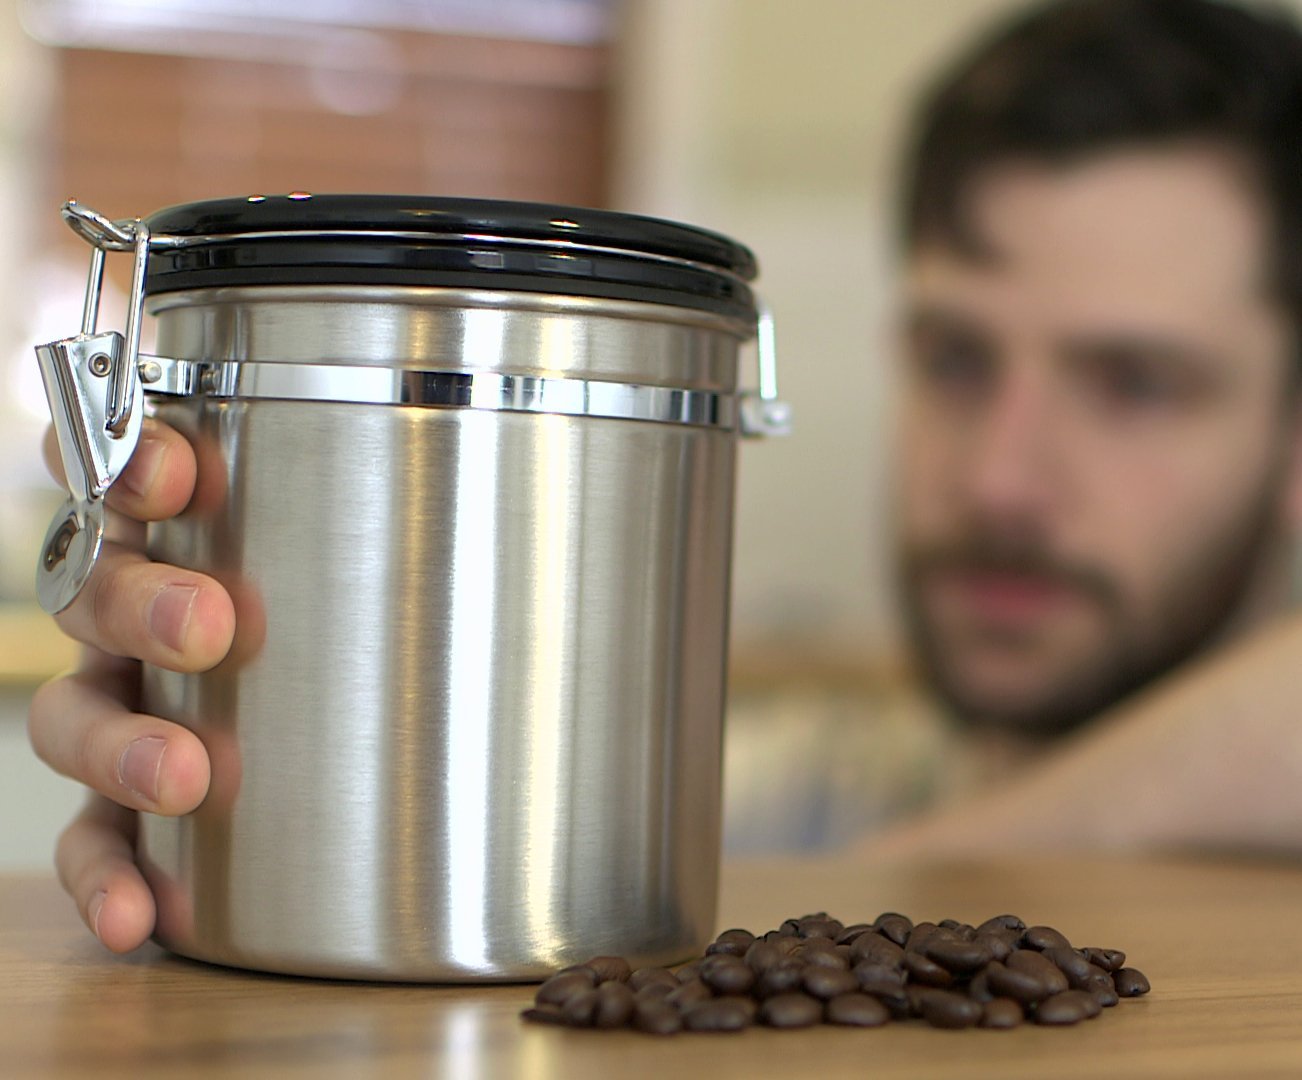 Download Popular Product Reviews by Amy: Stainless Steel Coffee Bean Container by Coffee Gator Review